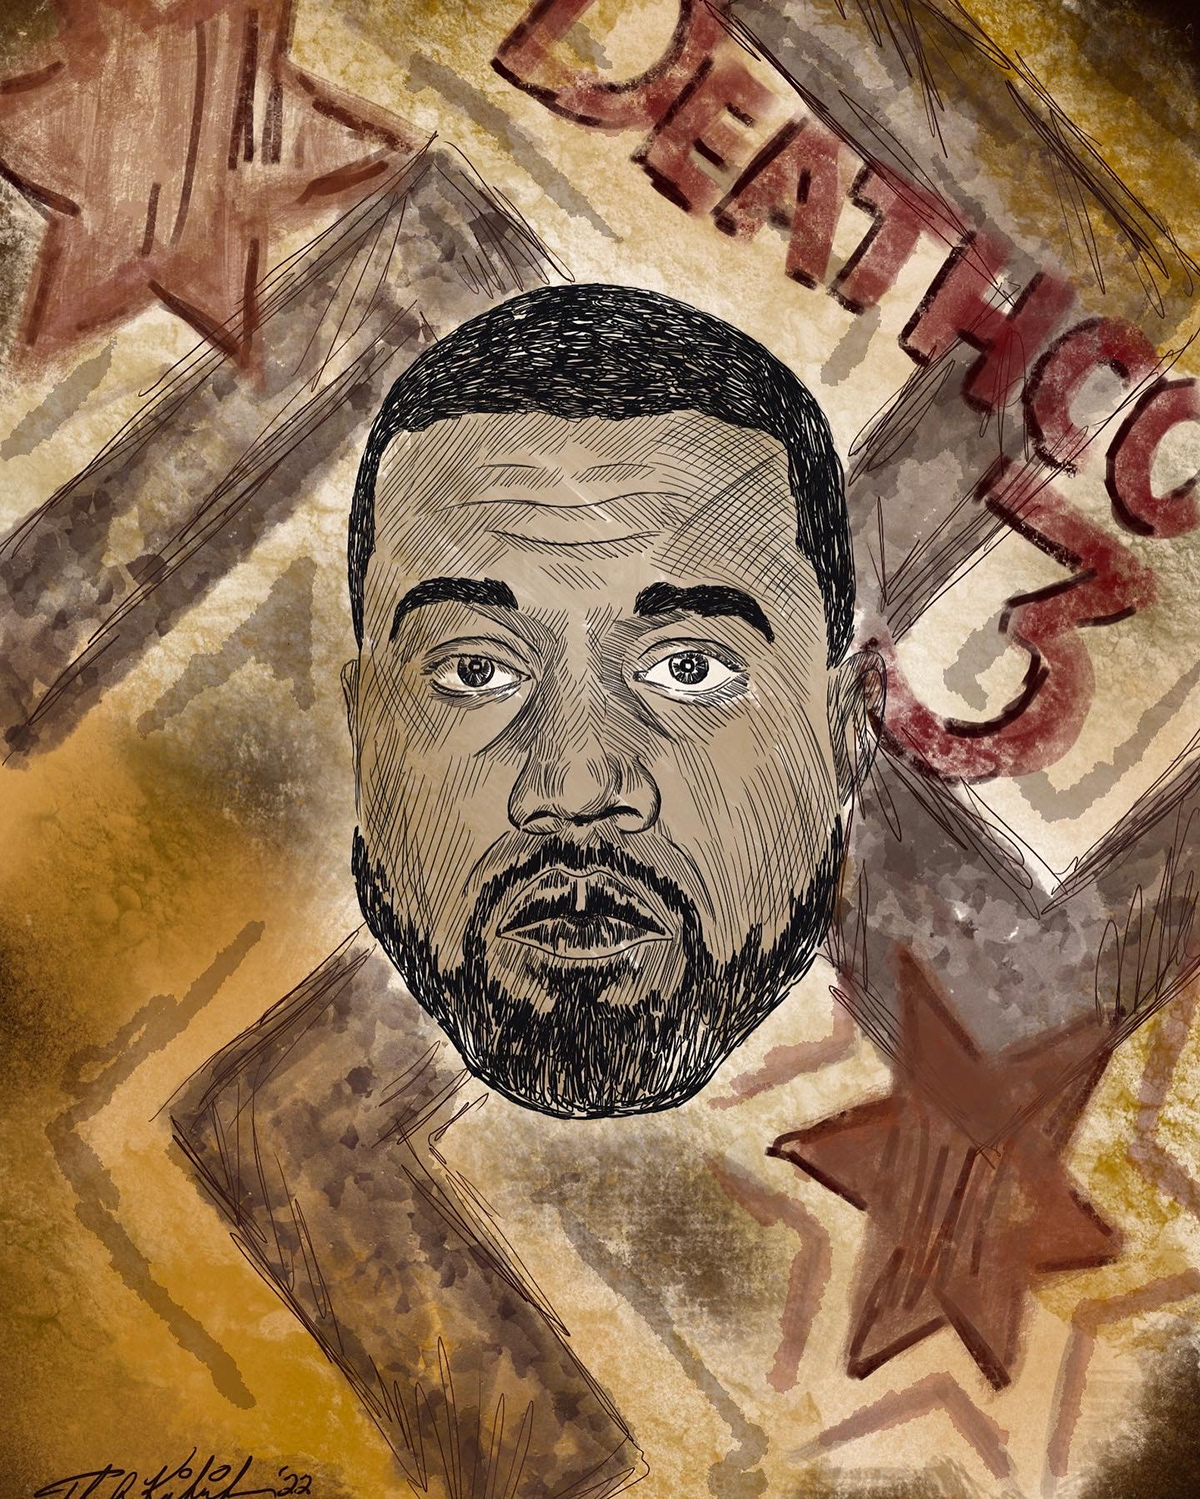 digital illustration - editorial art depicting Kanye West's recent issues with antisemitism